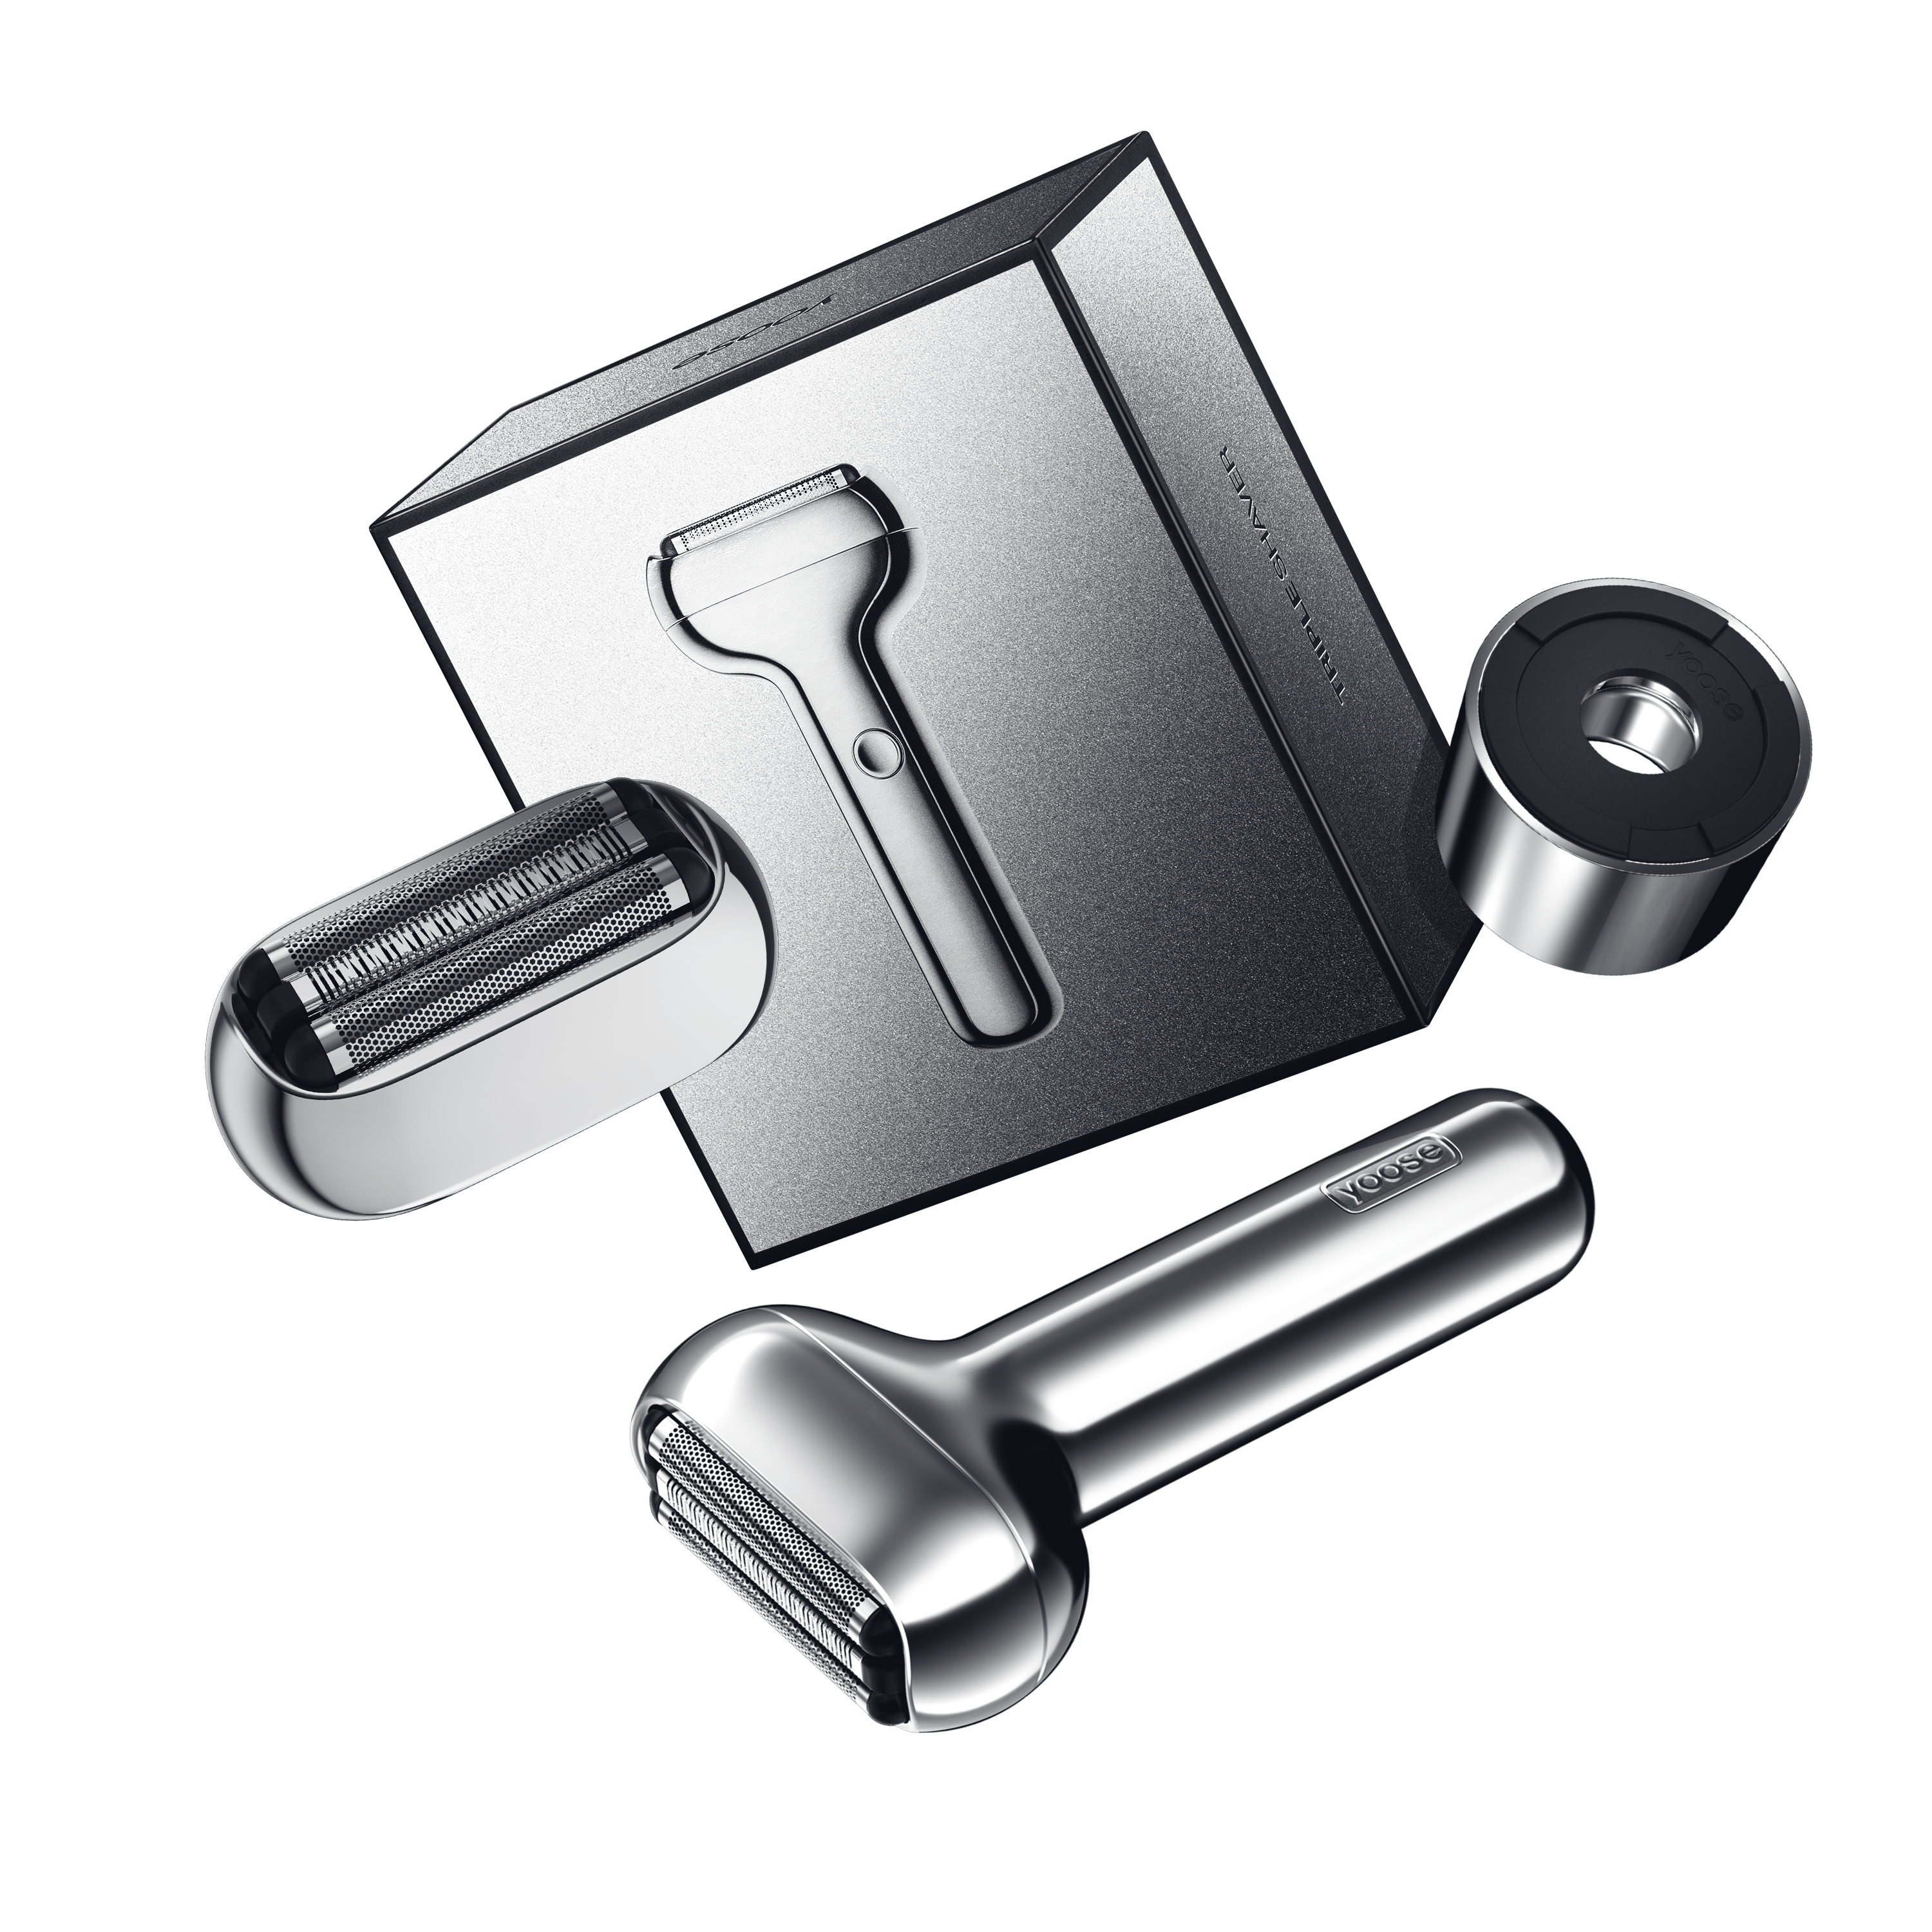 yoose triple foil shaver silver edition packed with a silver stand base and an extra silver cutterhead, it also wrapped by a silver package